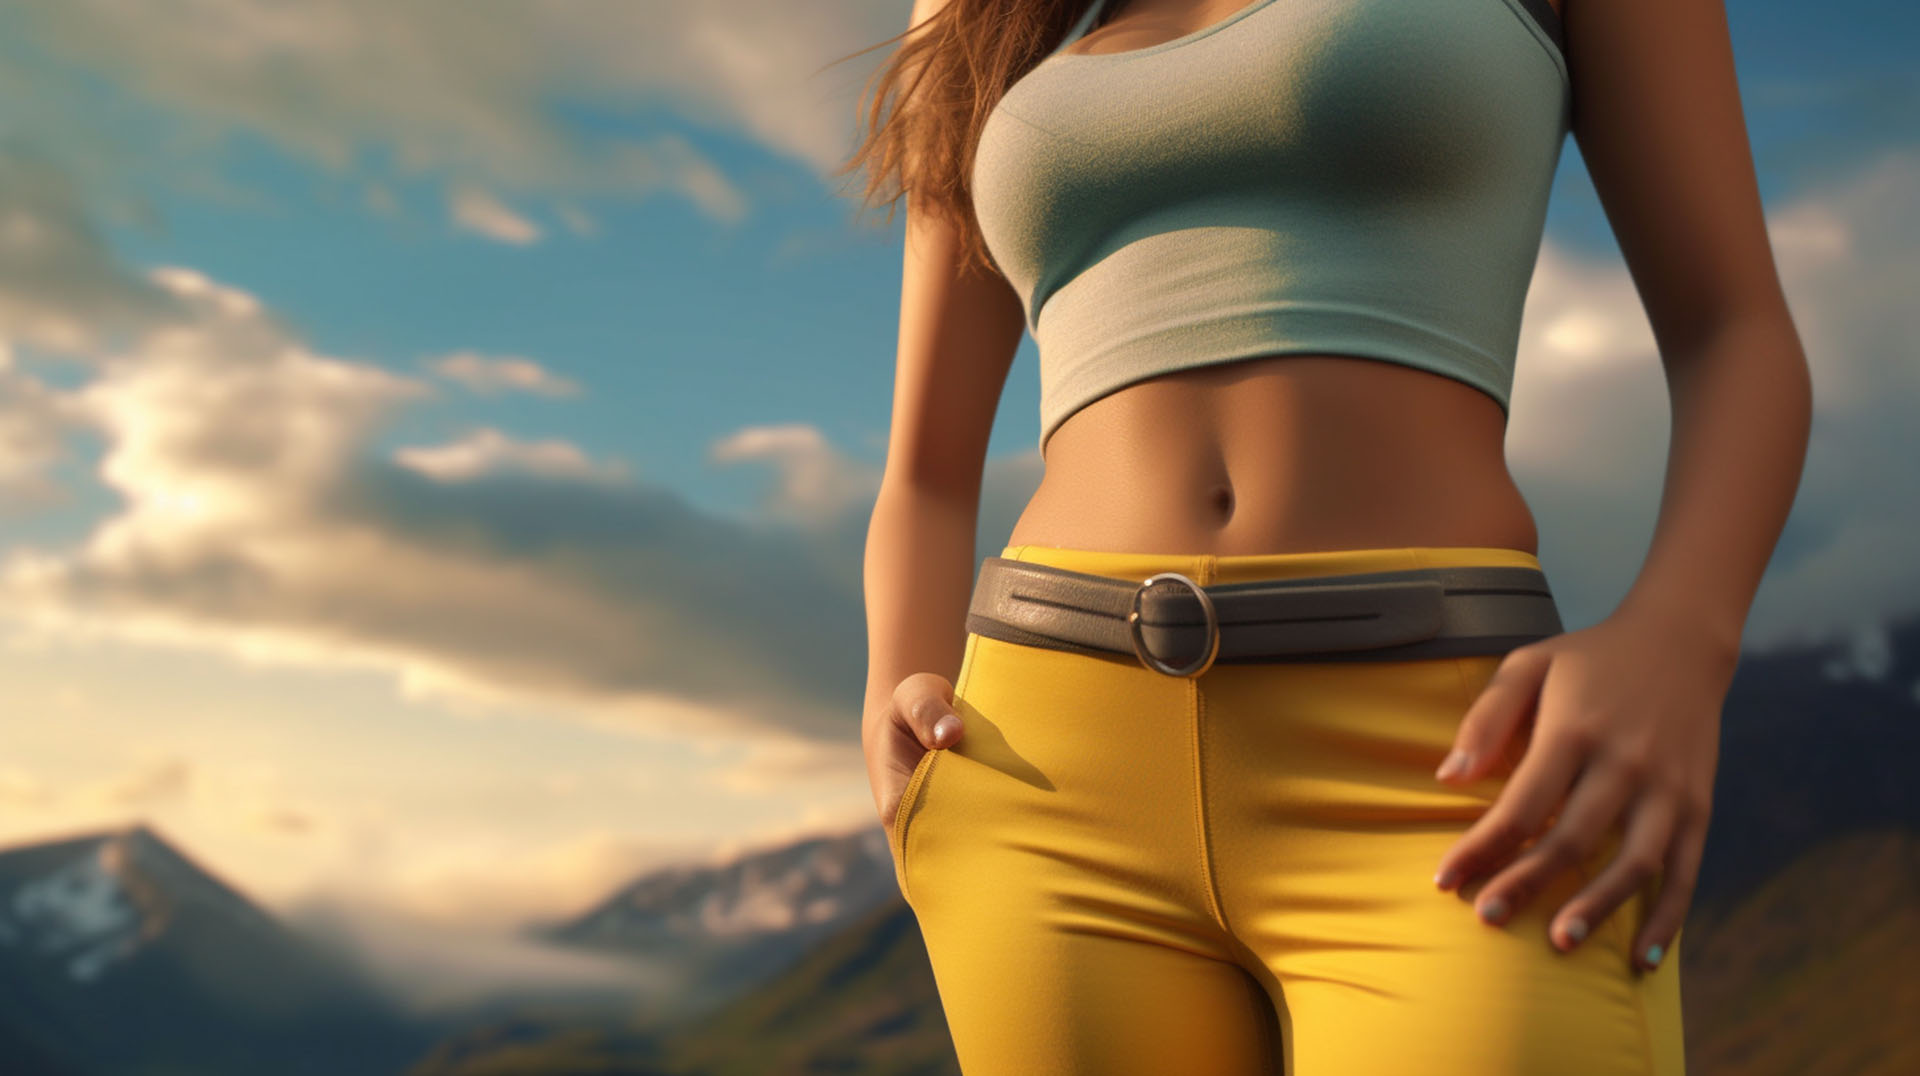 The results of CoolSculpting are long-term since the treated fat cells are eliminated from your body.